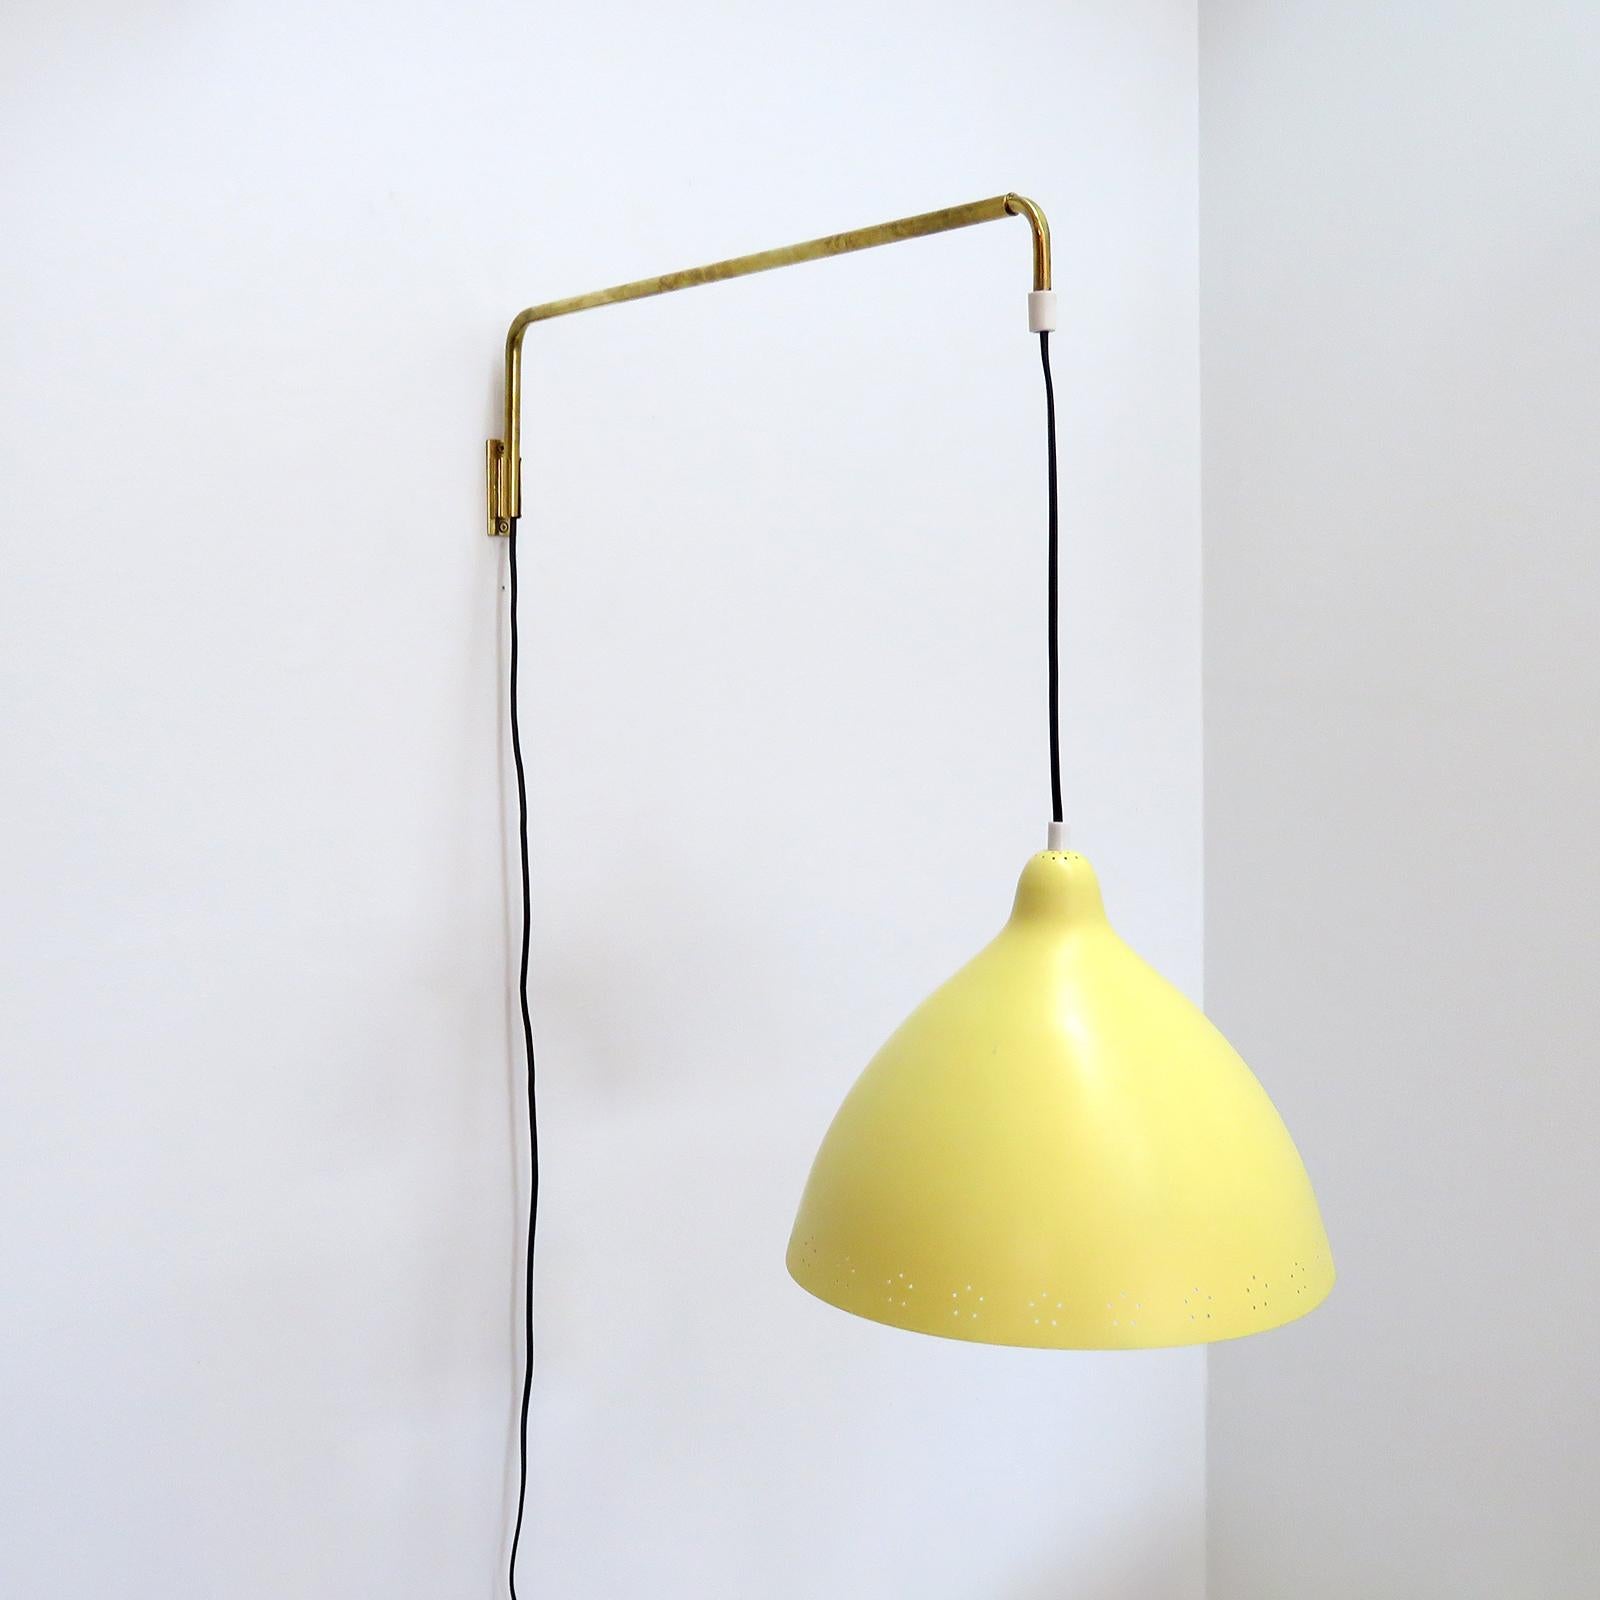 Wonderful swing arm wall lights by Lisa Johansson-Pape for Orno, Finland, 1960, shades in yellow painted metal with elegant perforations along the bottom rim of the shade, on a brass arm that can extend 36-56